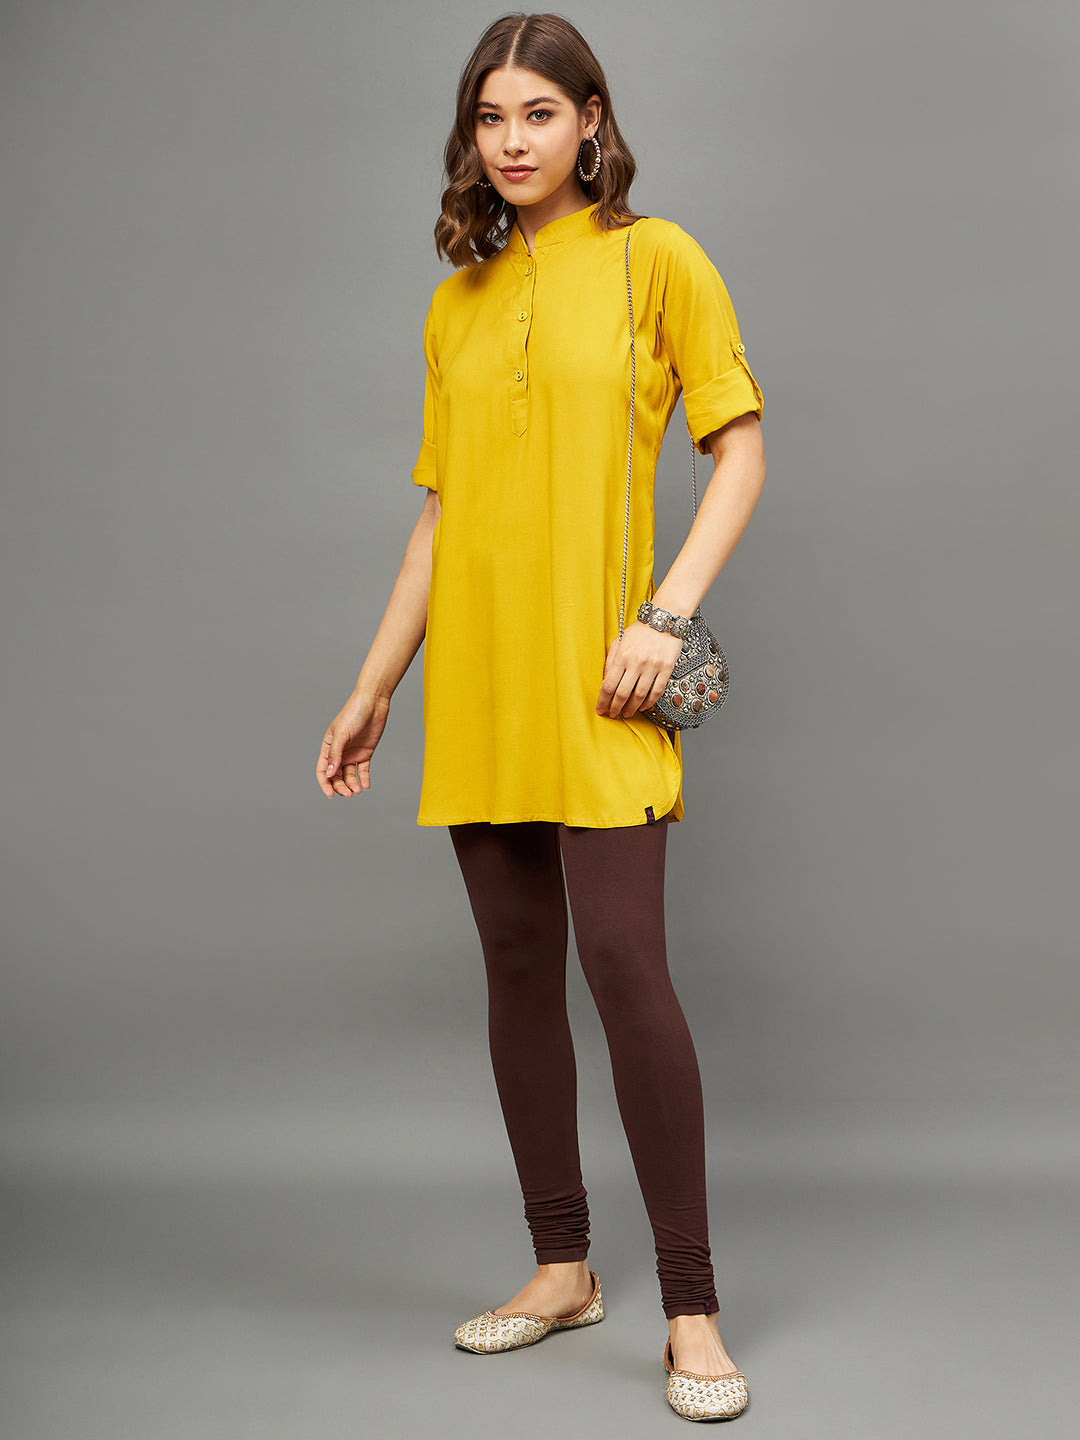 Which Colour Leggings With Yellow Kurti | International Society of  Precision Agriculture